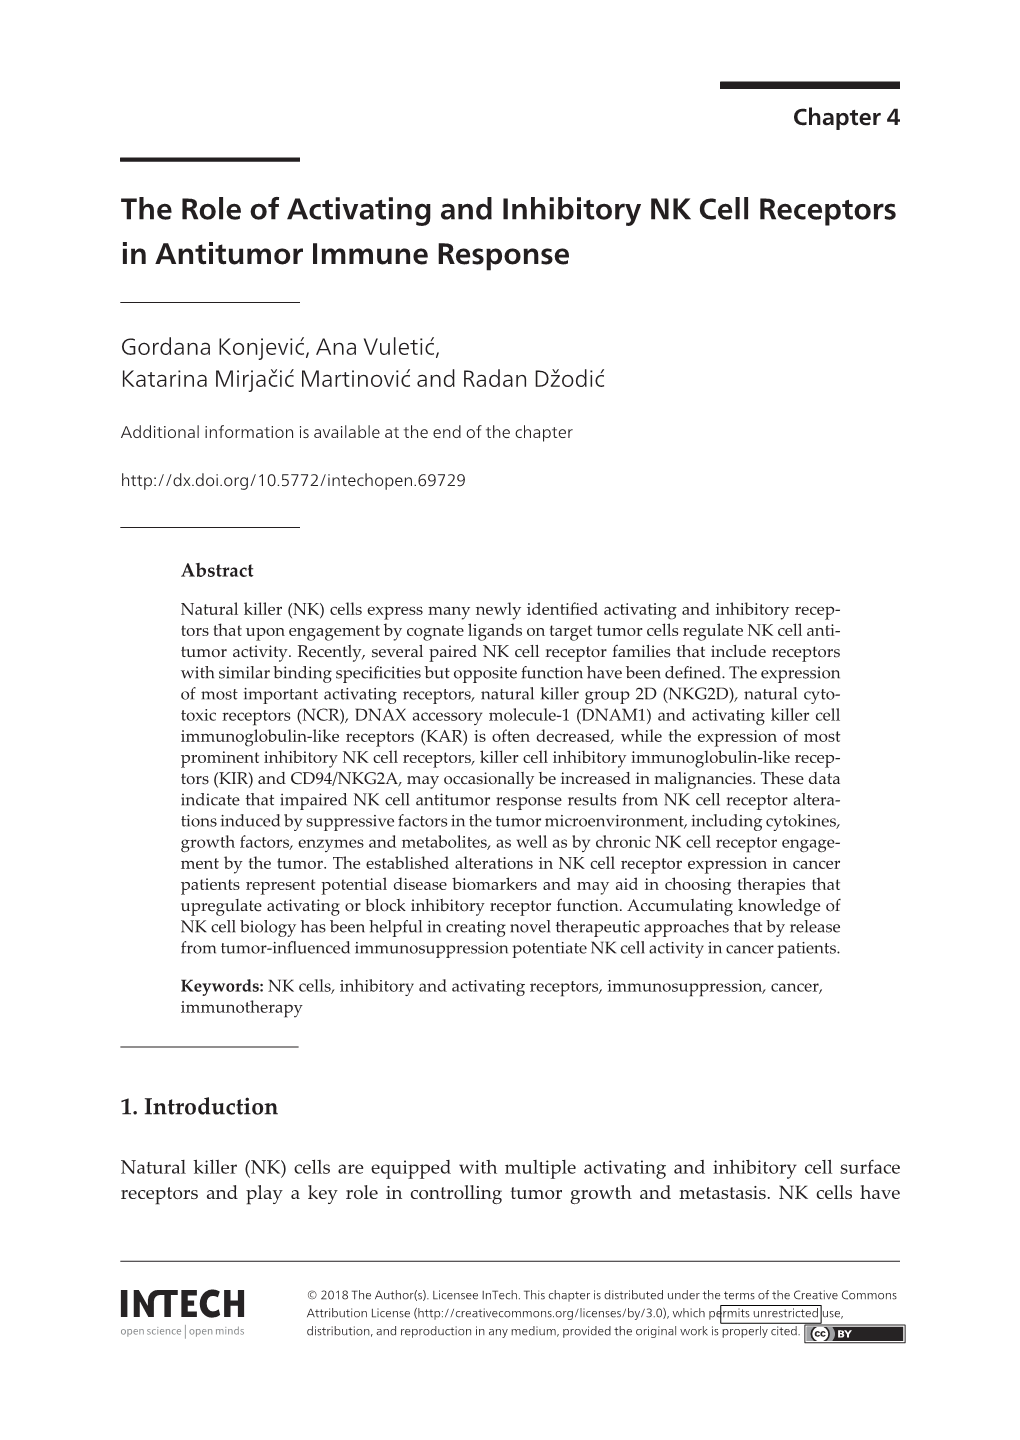 The Role of Activating and Inhibitory NK Cell Receptors in Antitumor Immune Response